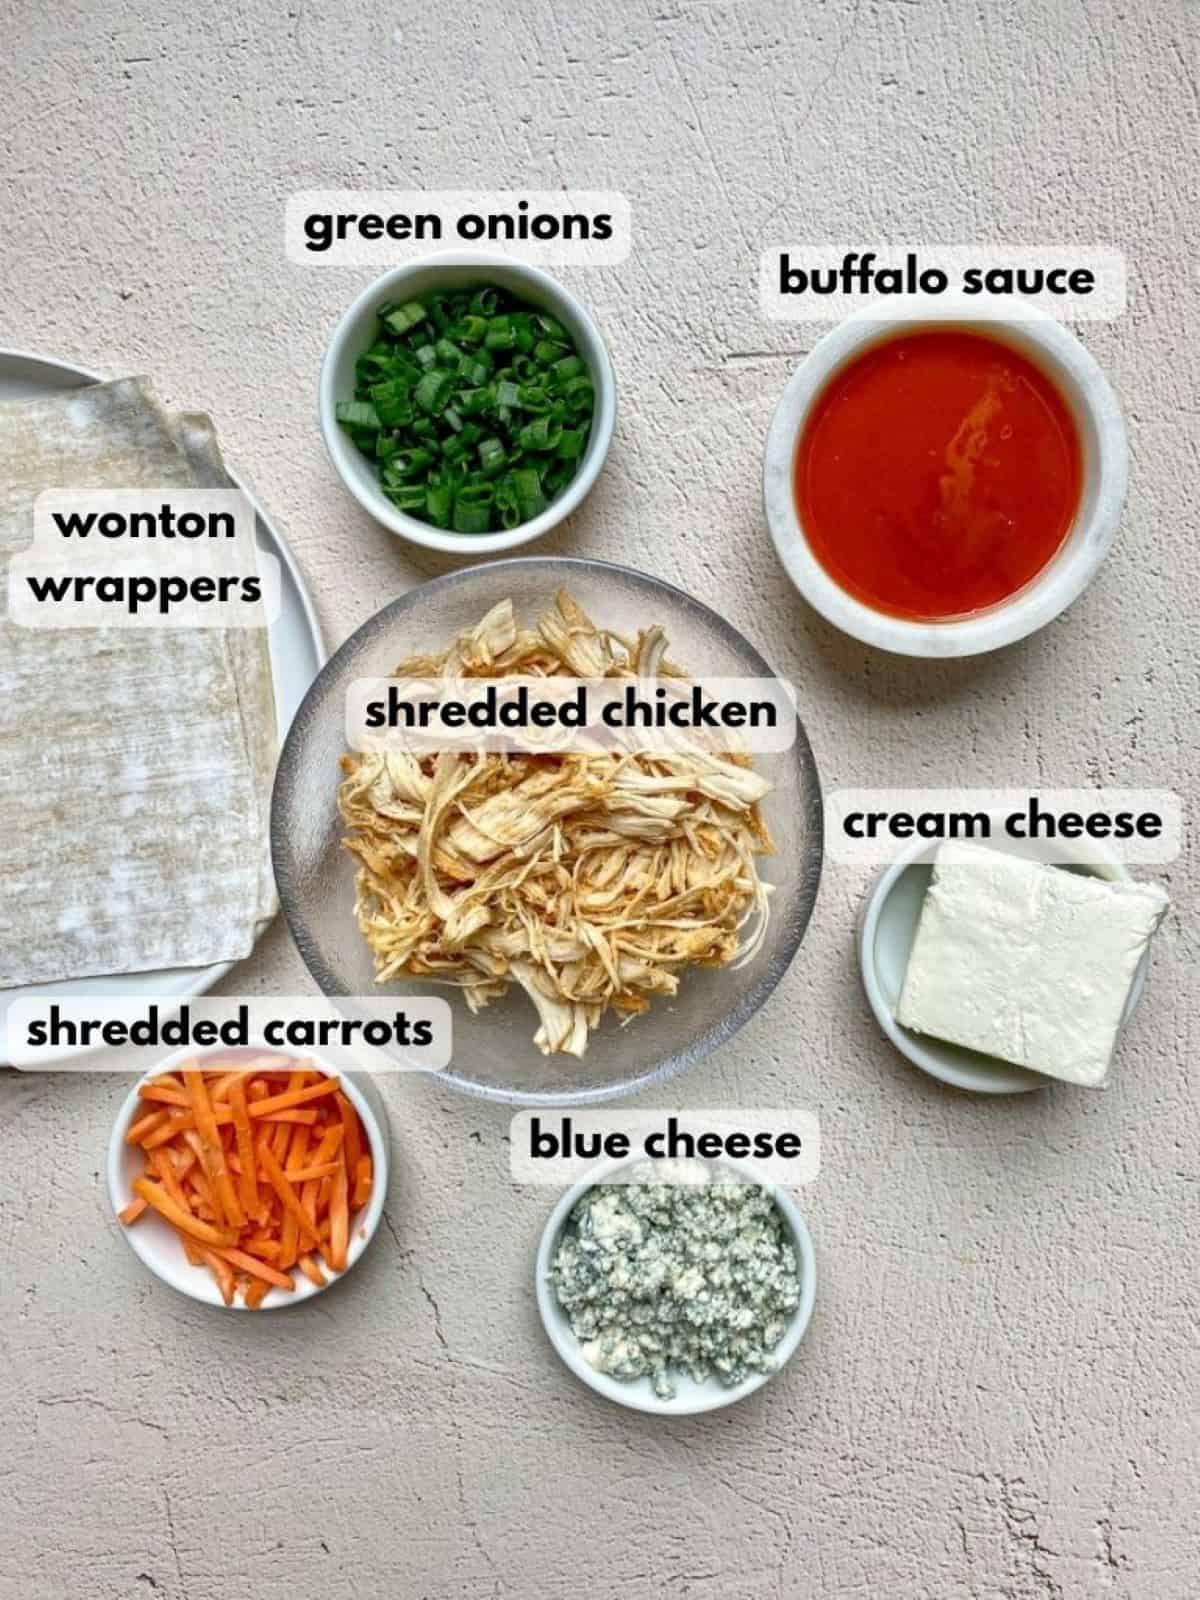 Ingredients needed for buffalo egg rolls: shredded chicken, egg roll wrappers, cream cheese, blue cheese, carrots, buffalo sauce, and green onions.